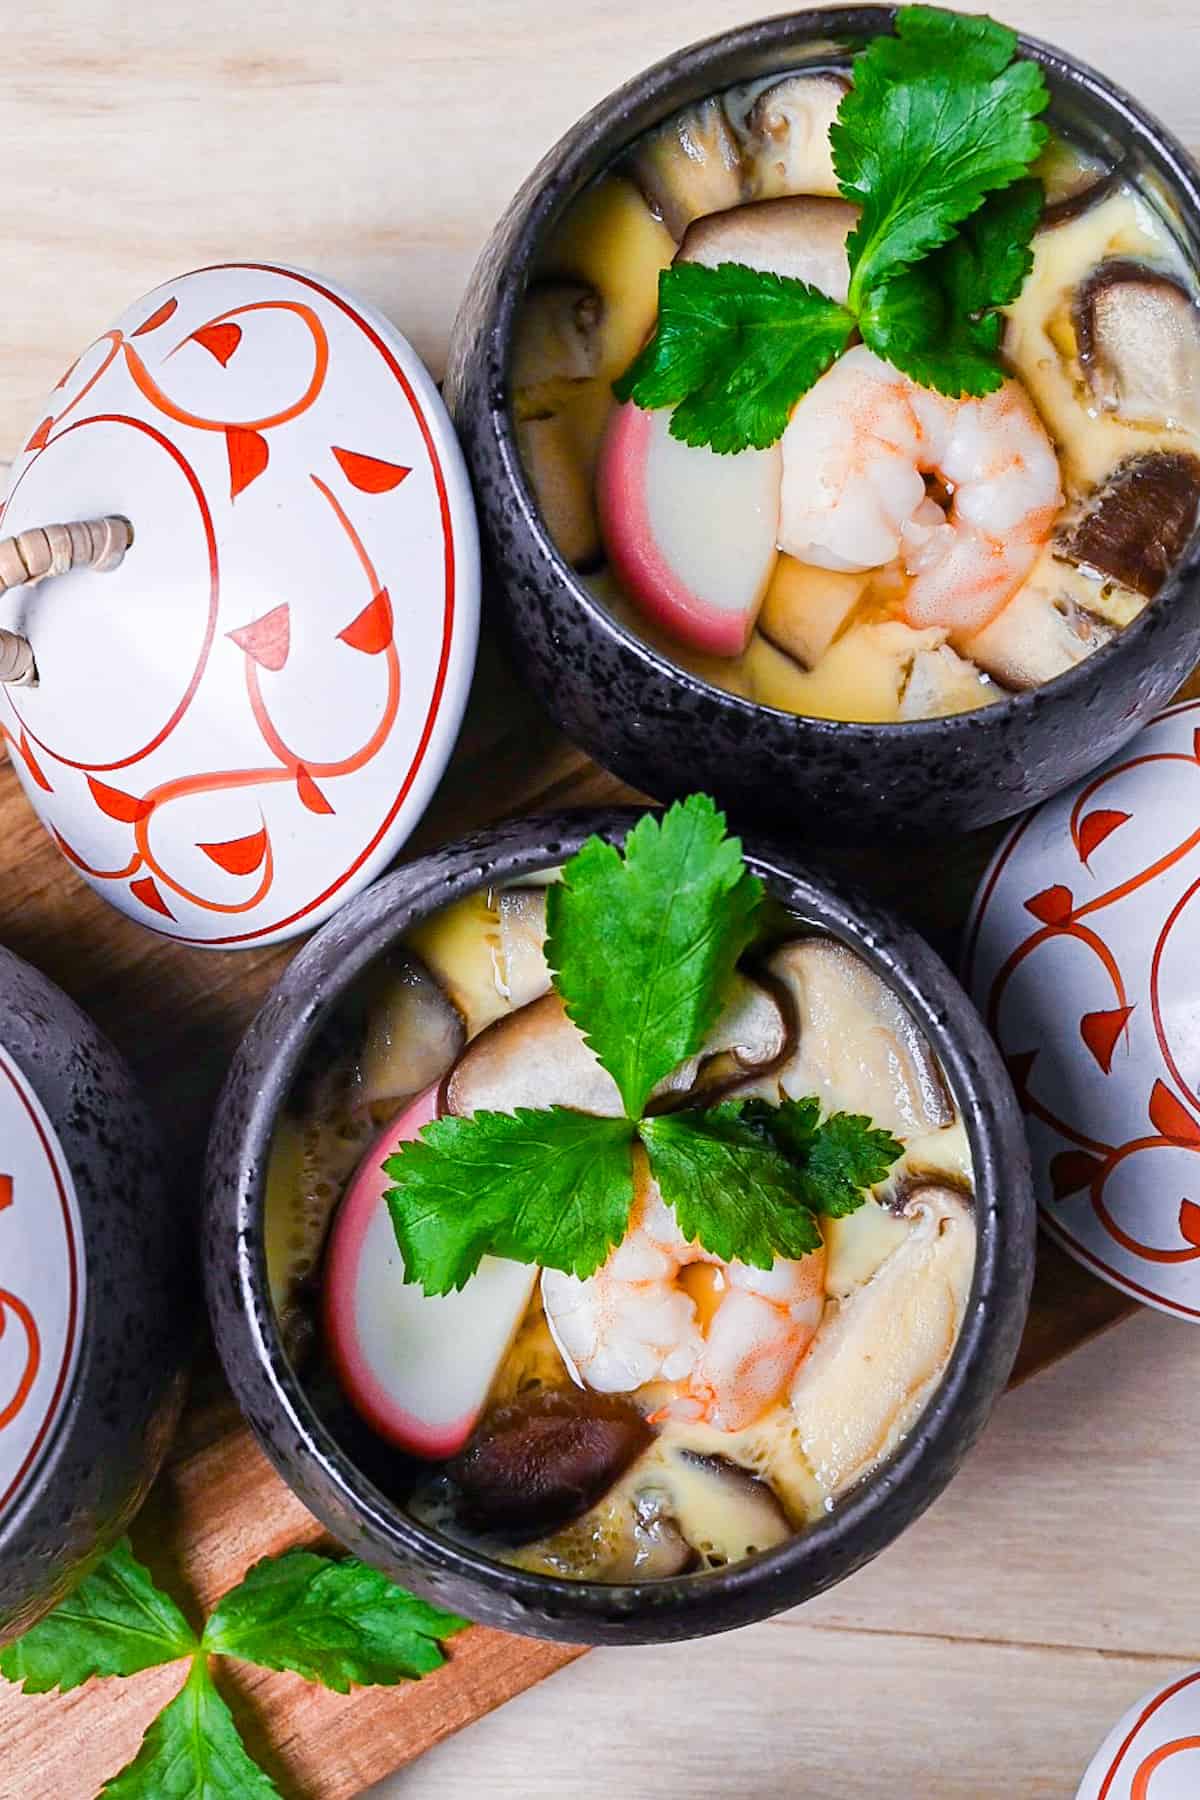 Chawanmushi (Japanese steamed egg custard) in black steaming cups with white and red decorative lids top down